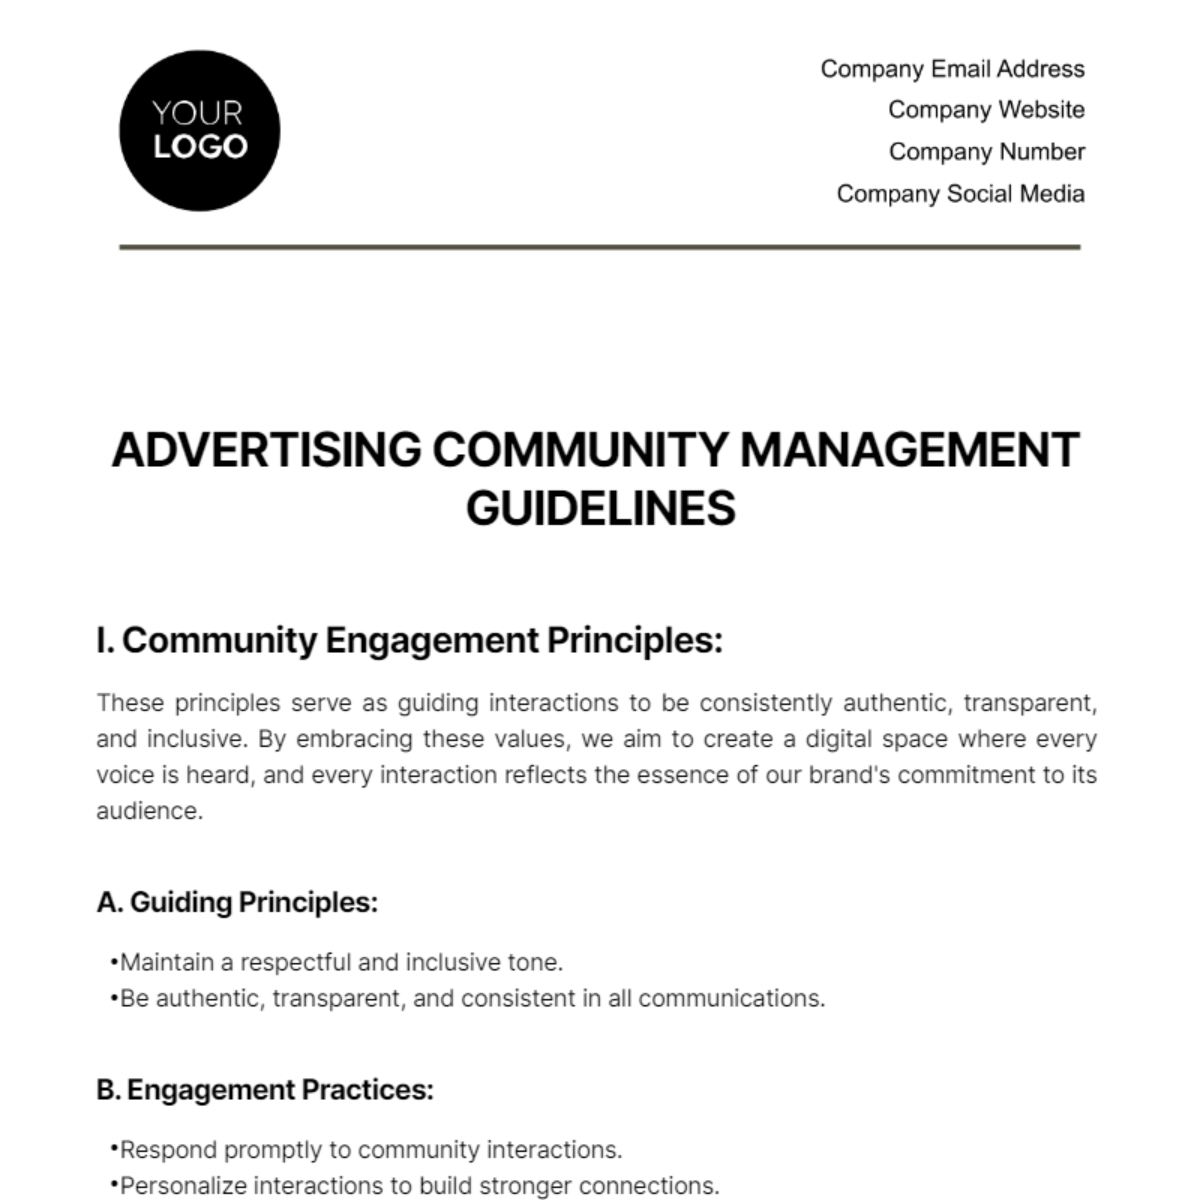 Advertising Community Management Guidelines Template